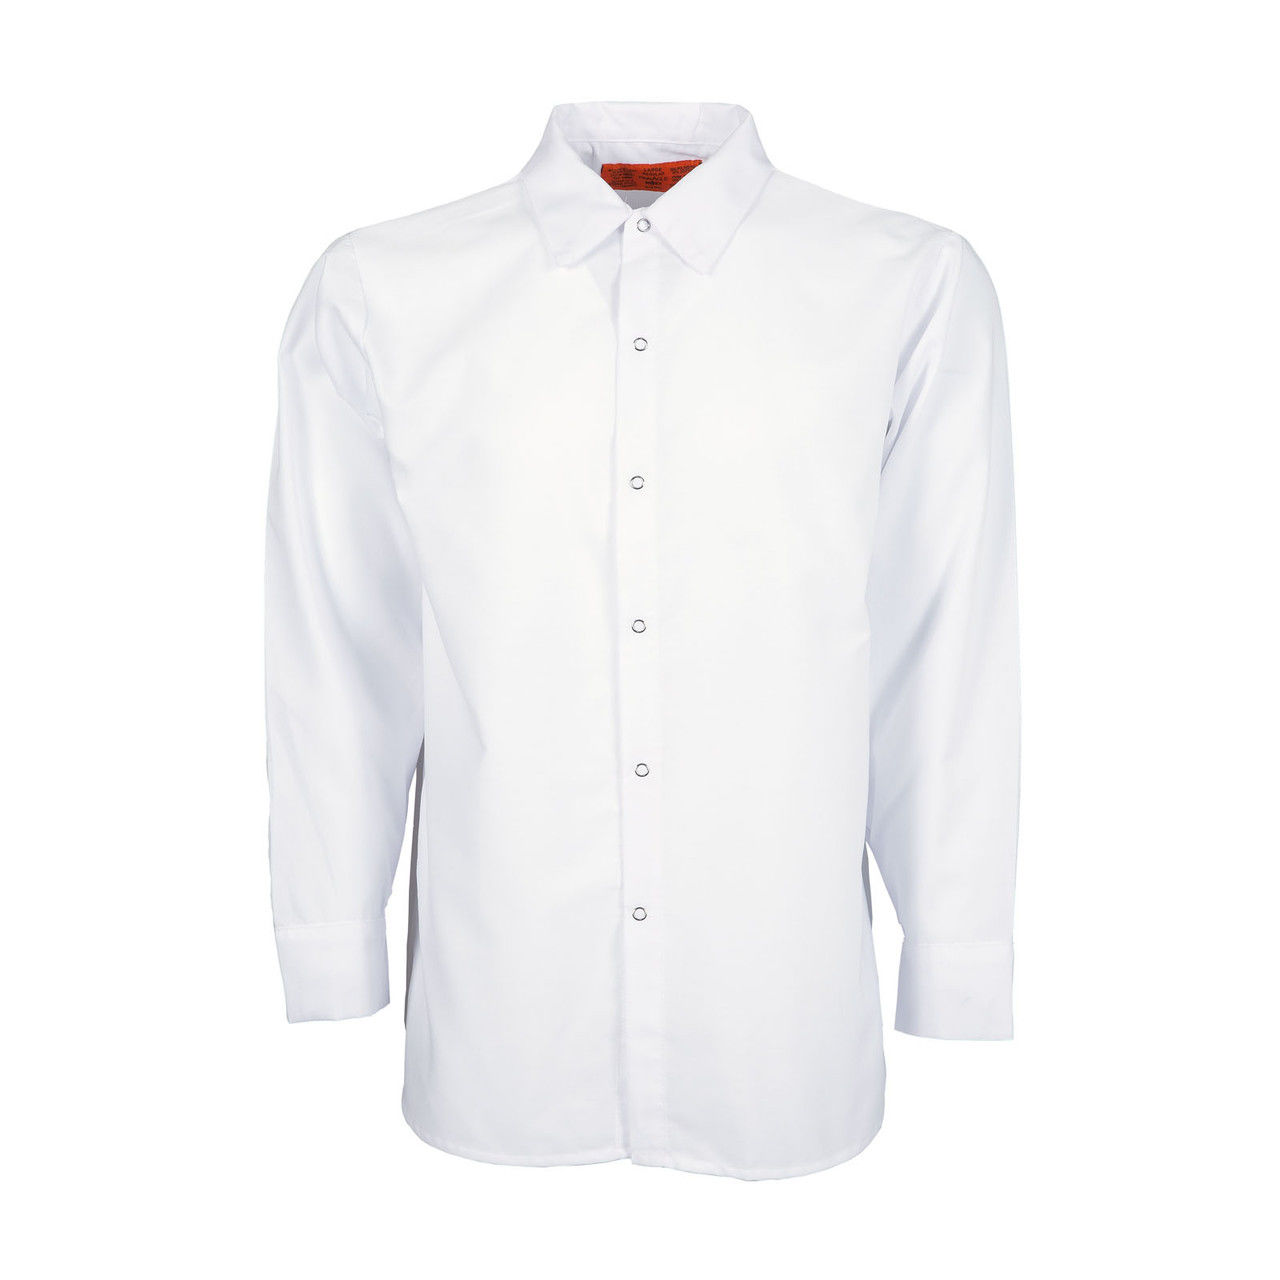 What's the material composition of these white work shirts for men?